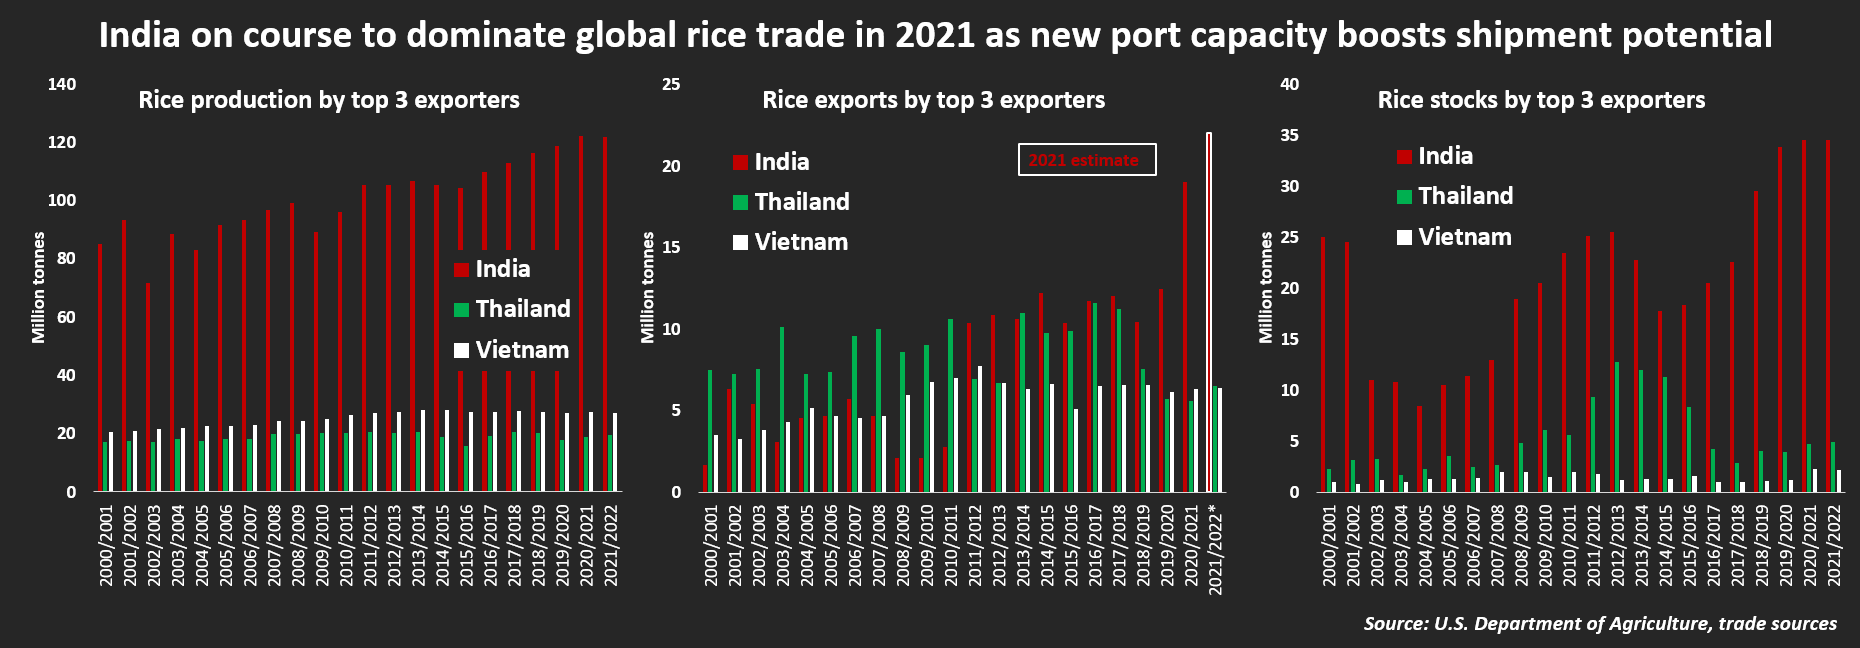 India on course to dominate global rice trade in 2021 as new port capacity boosts shipment potential